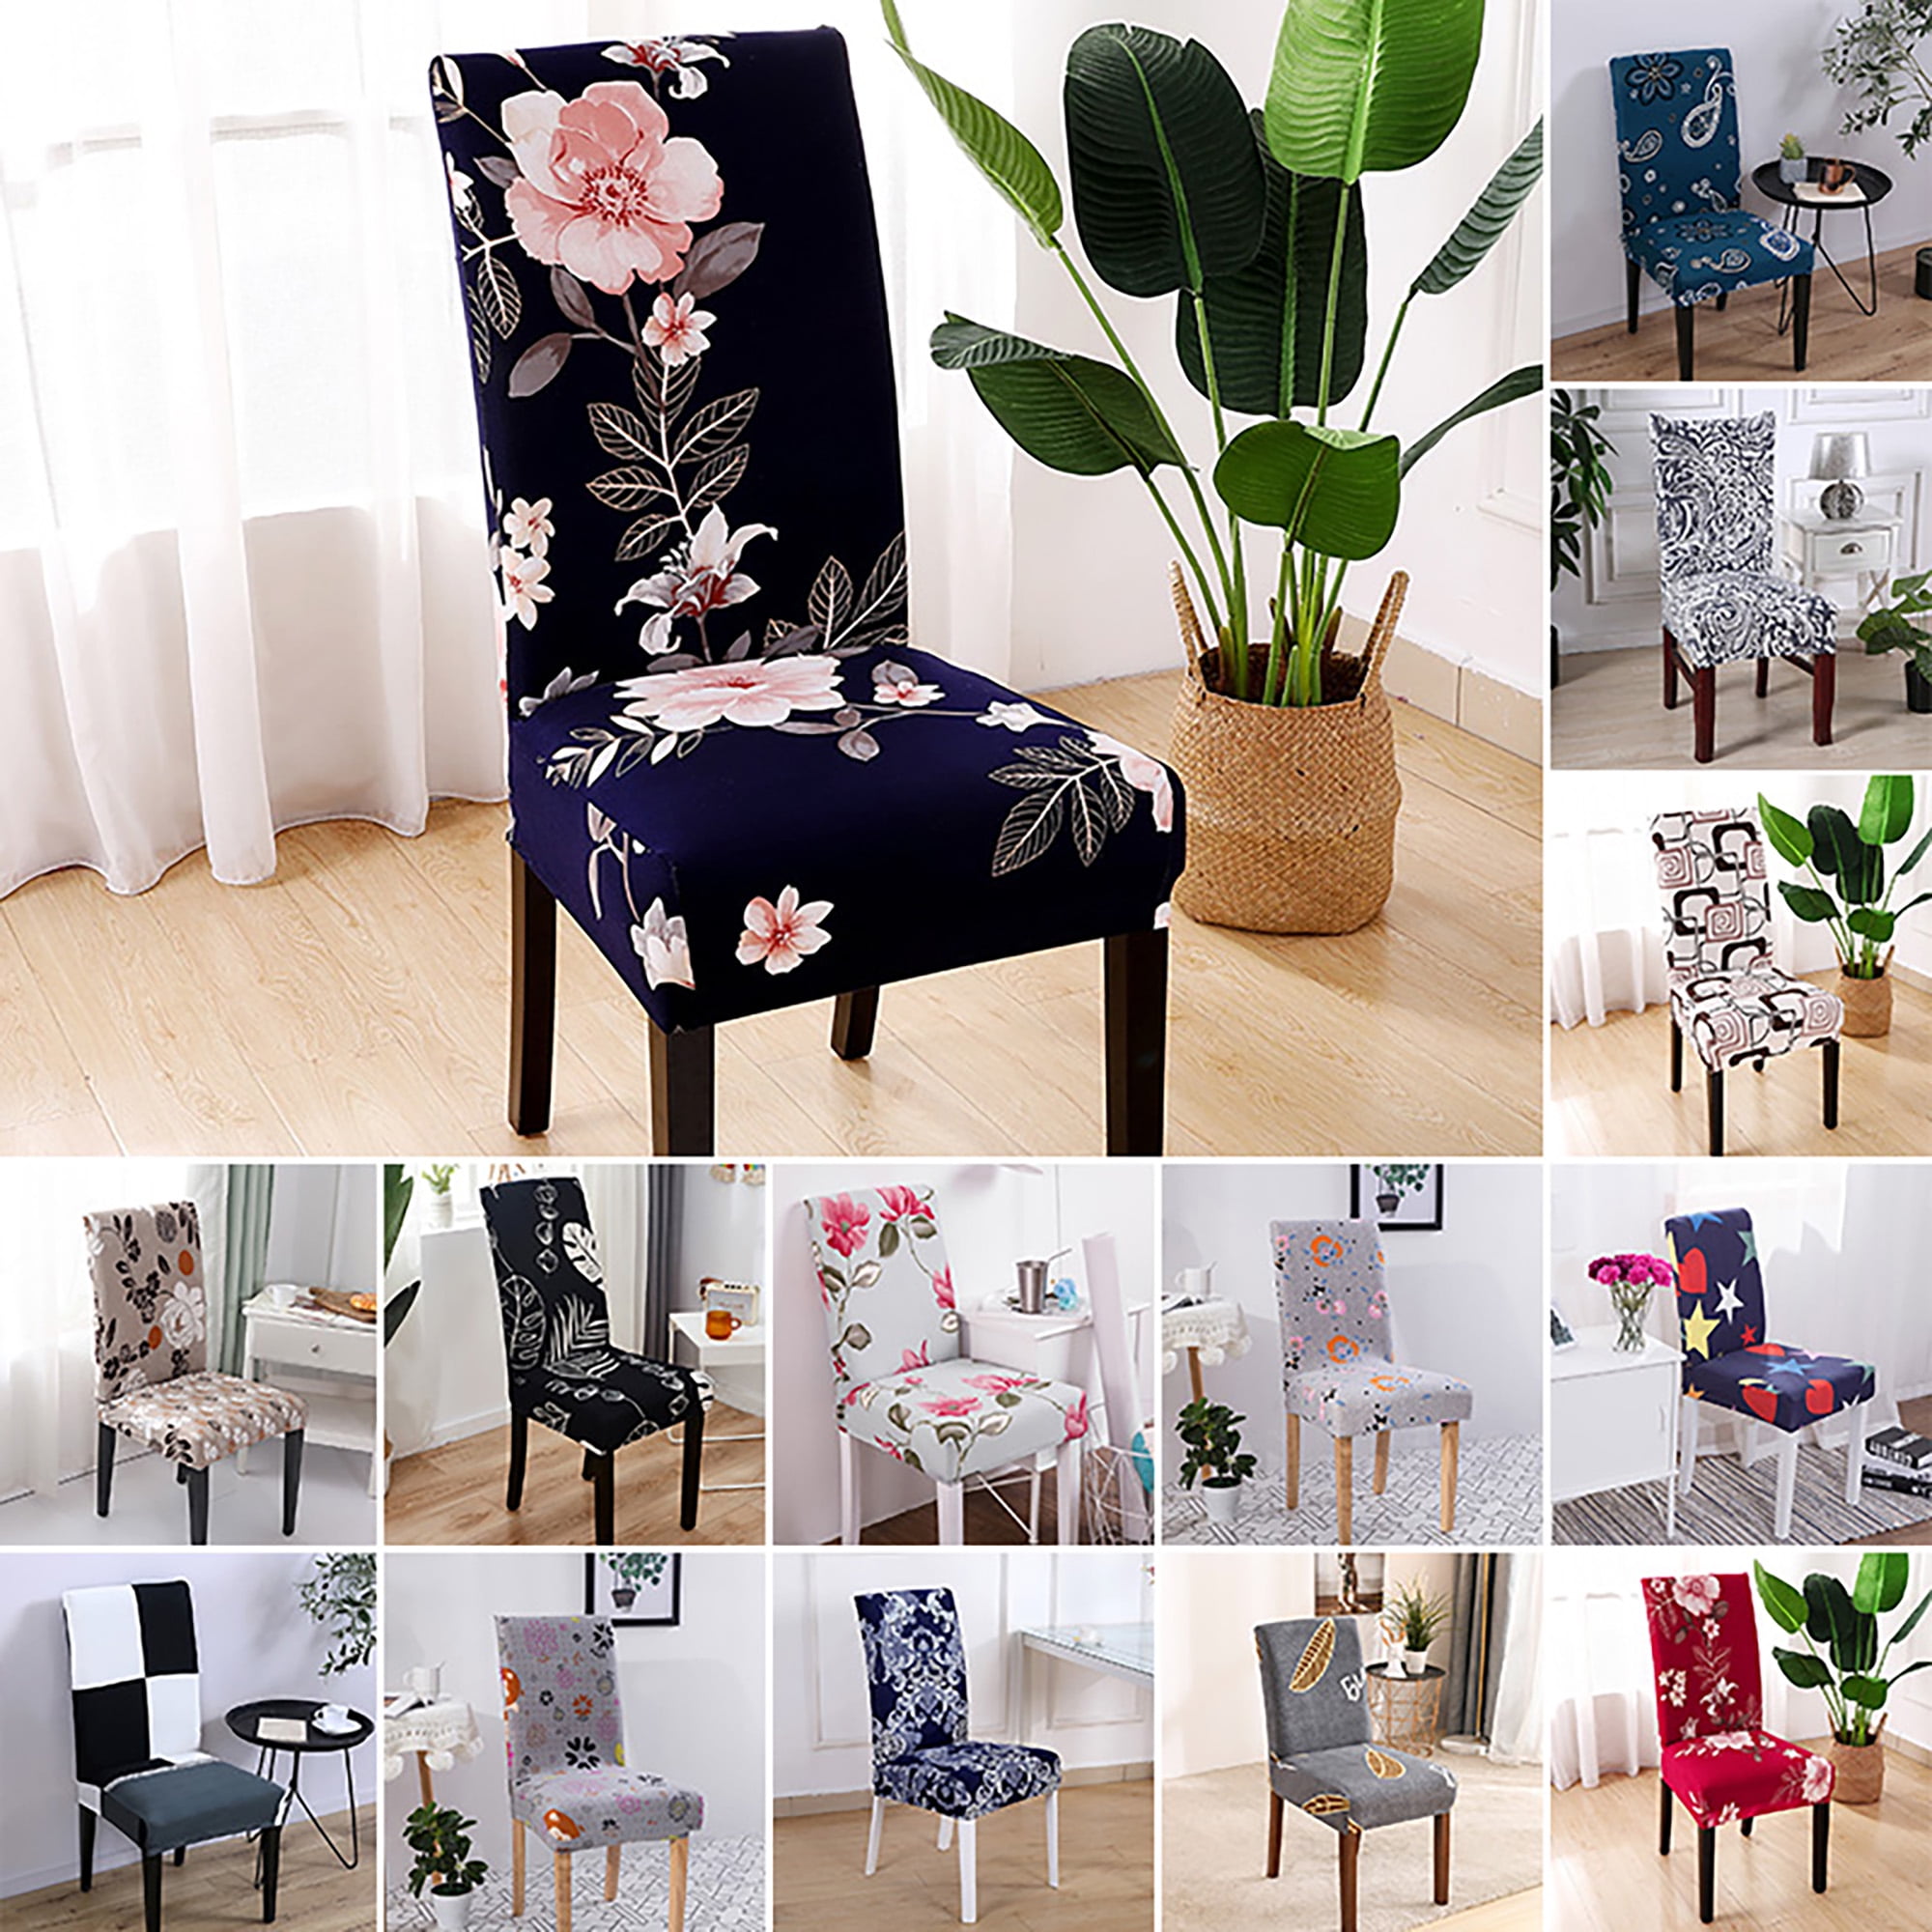 Details about   Stretch Floral Printed Chair Cover Dining Room Chair Covers Removable Decor 